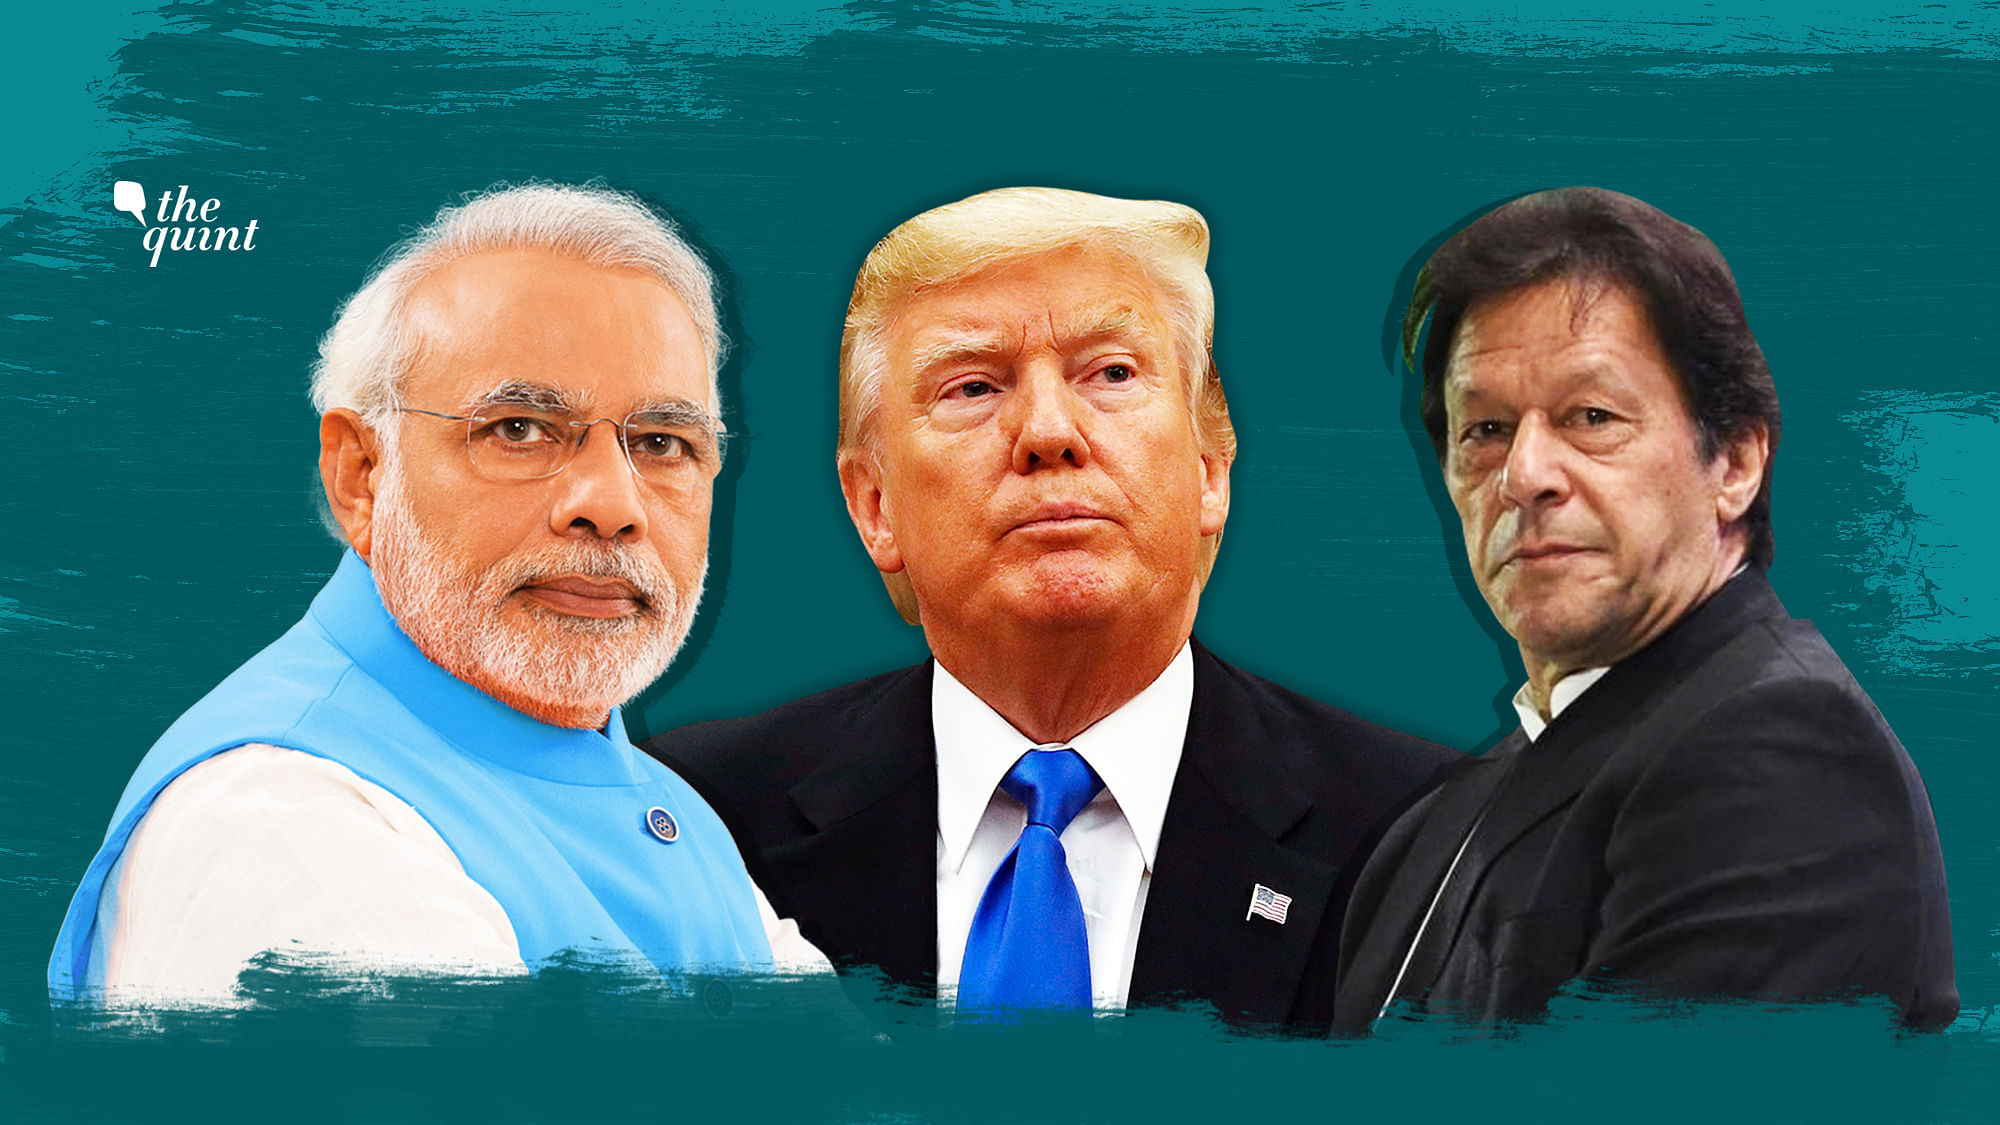 US President Trump will meet Pakistan PM Imran Khan on Monday, PM Modi for the ‘Howdy Modi’ event today and for another meeting on Monday.